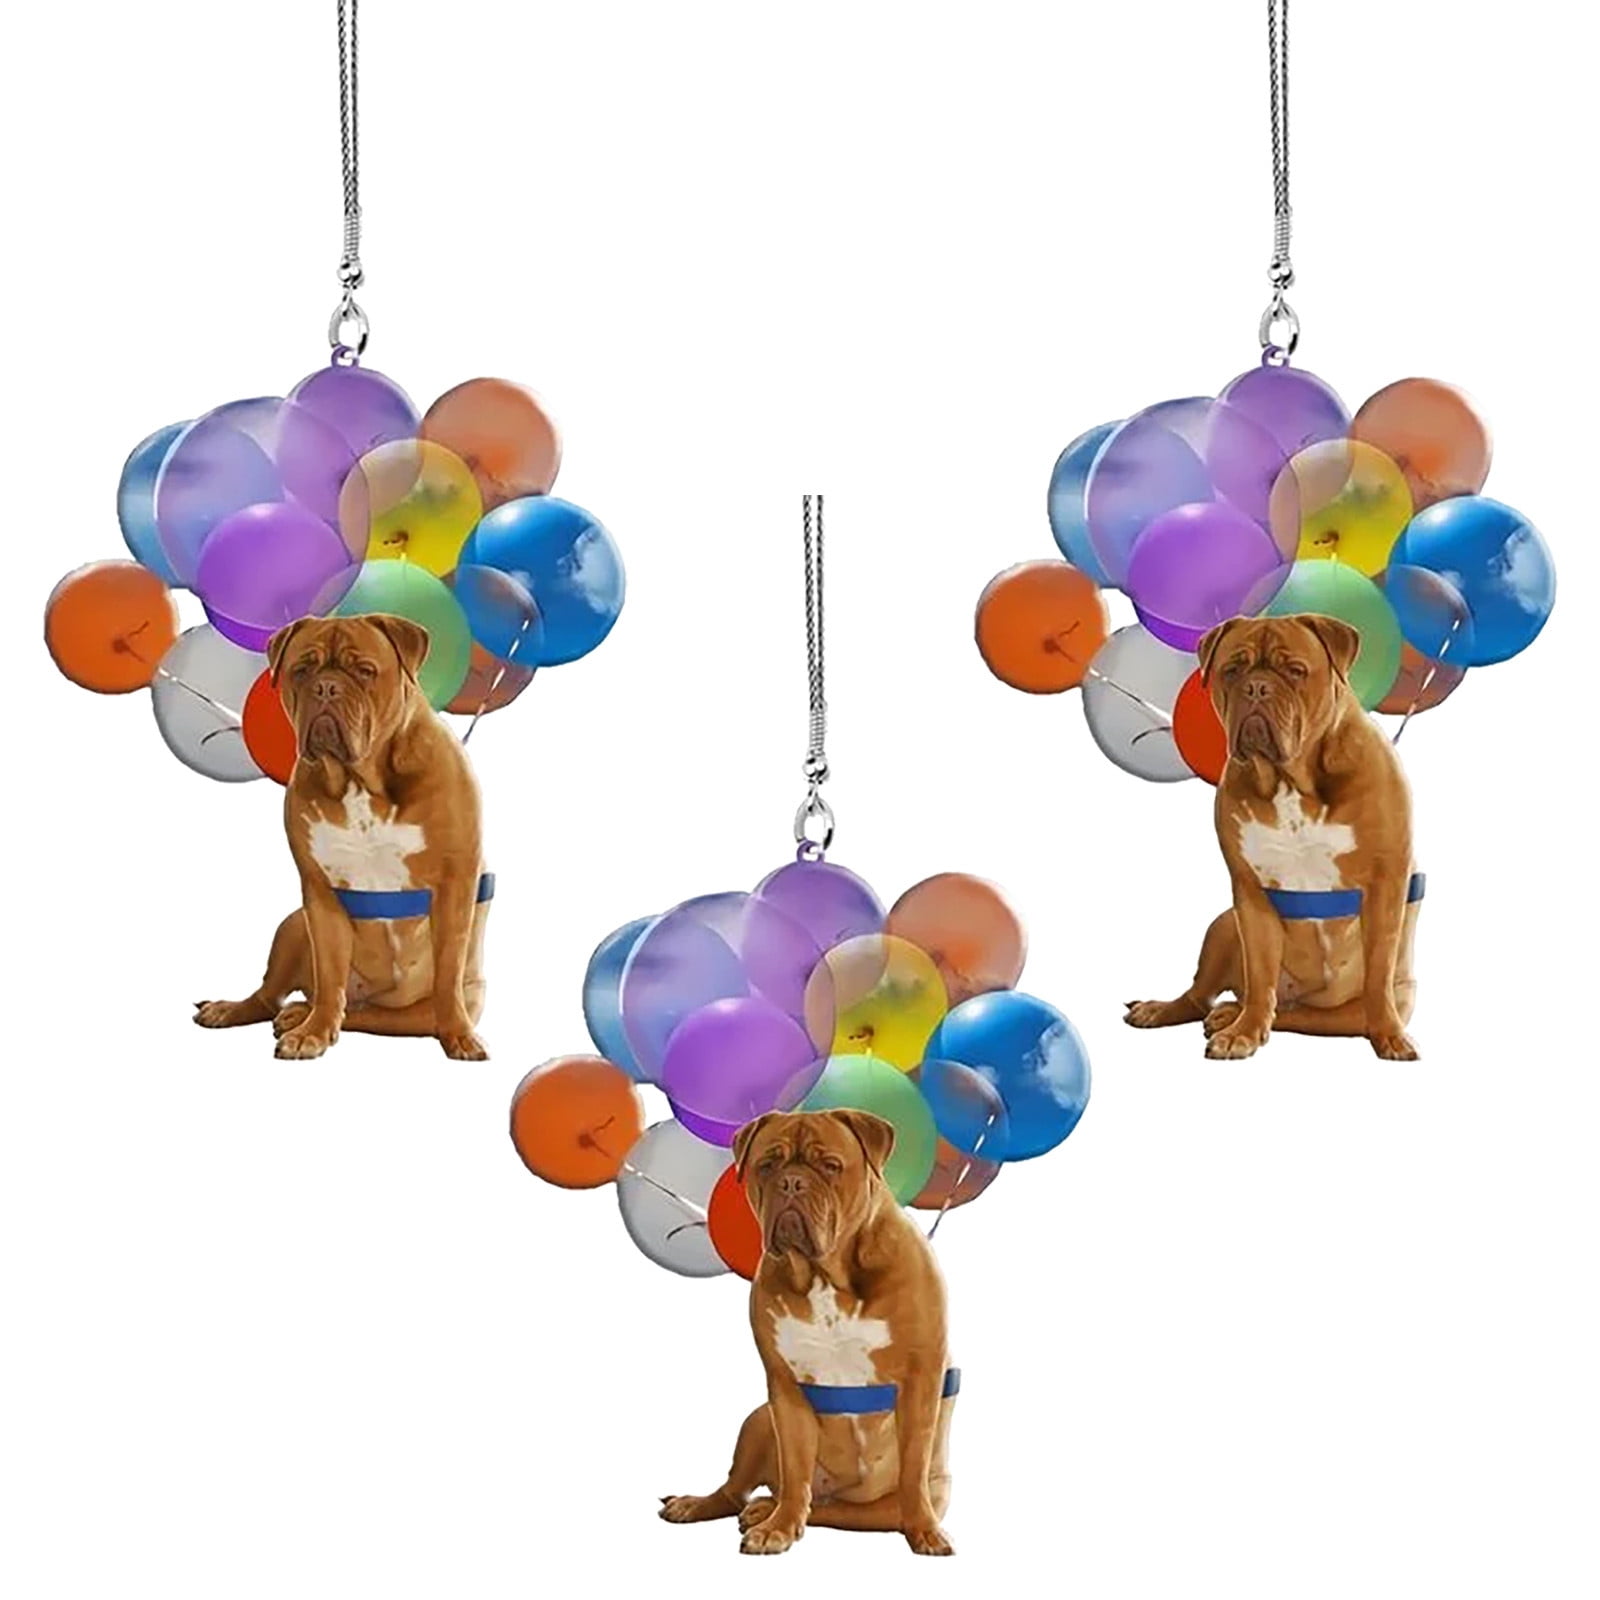 Cute Dog Car Hanging Ornament w/ Colorful Balloon Hanging Ornament Decor-HOT 